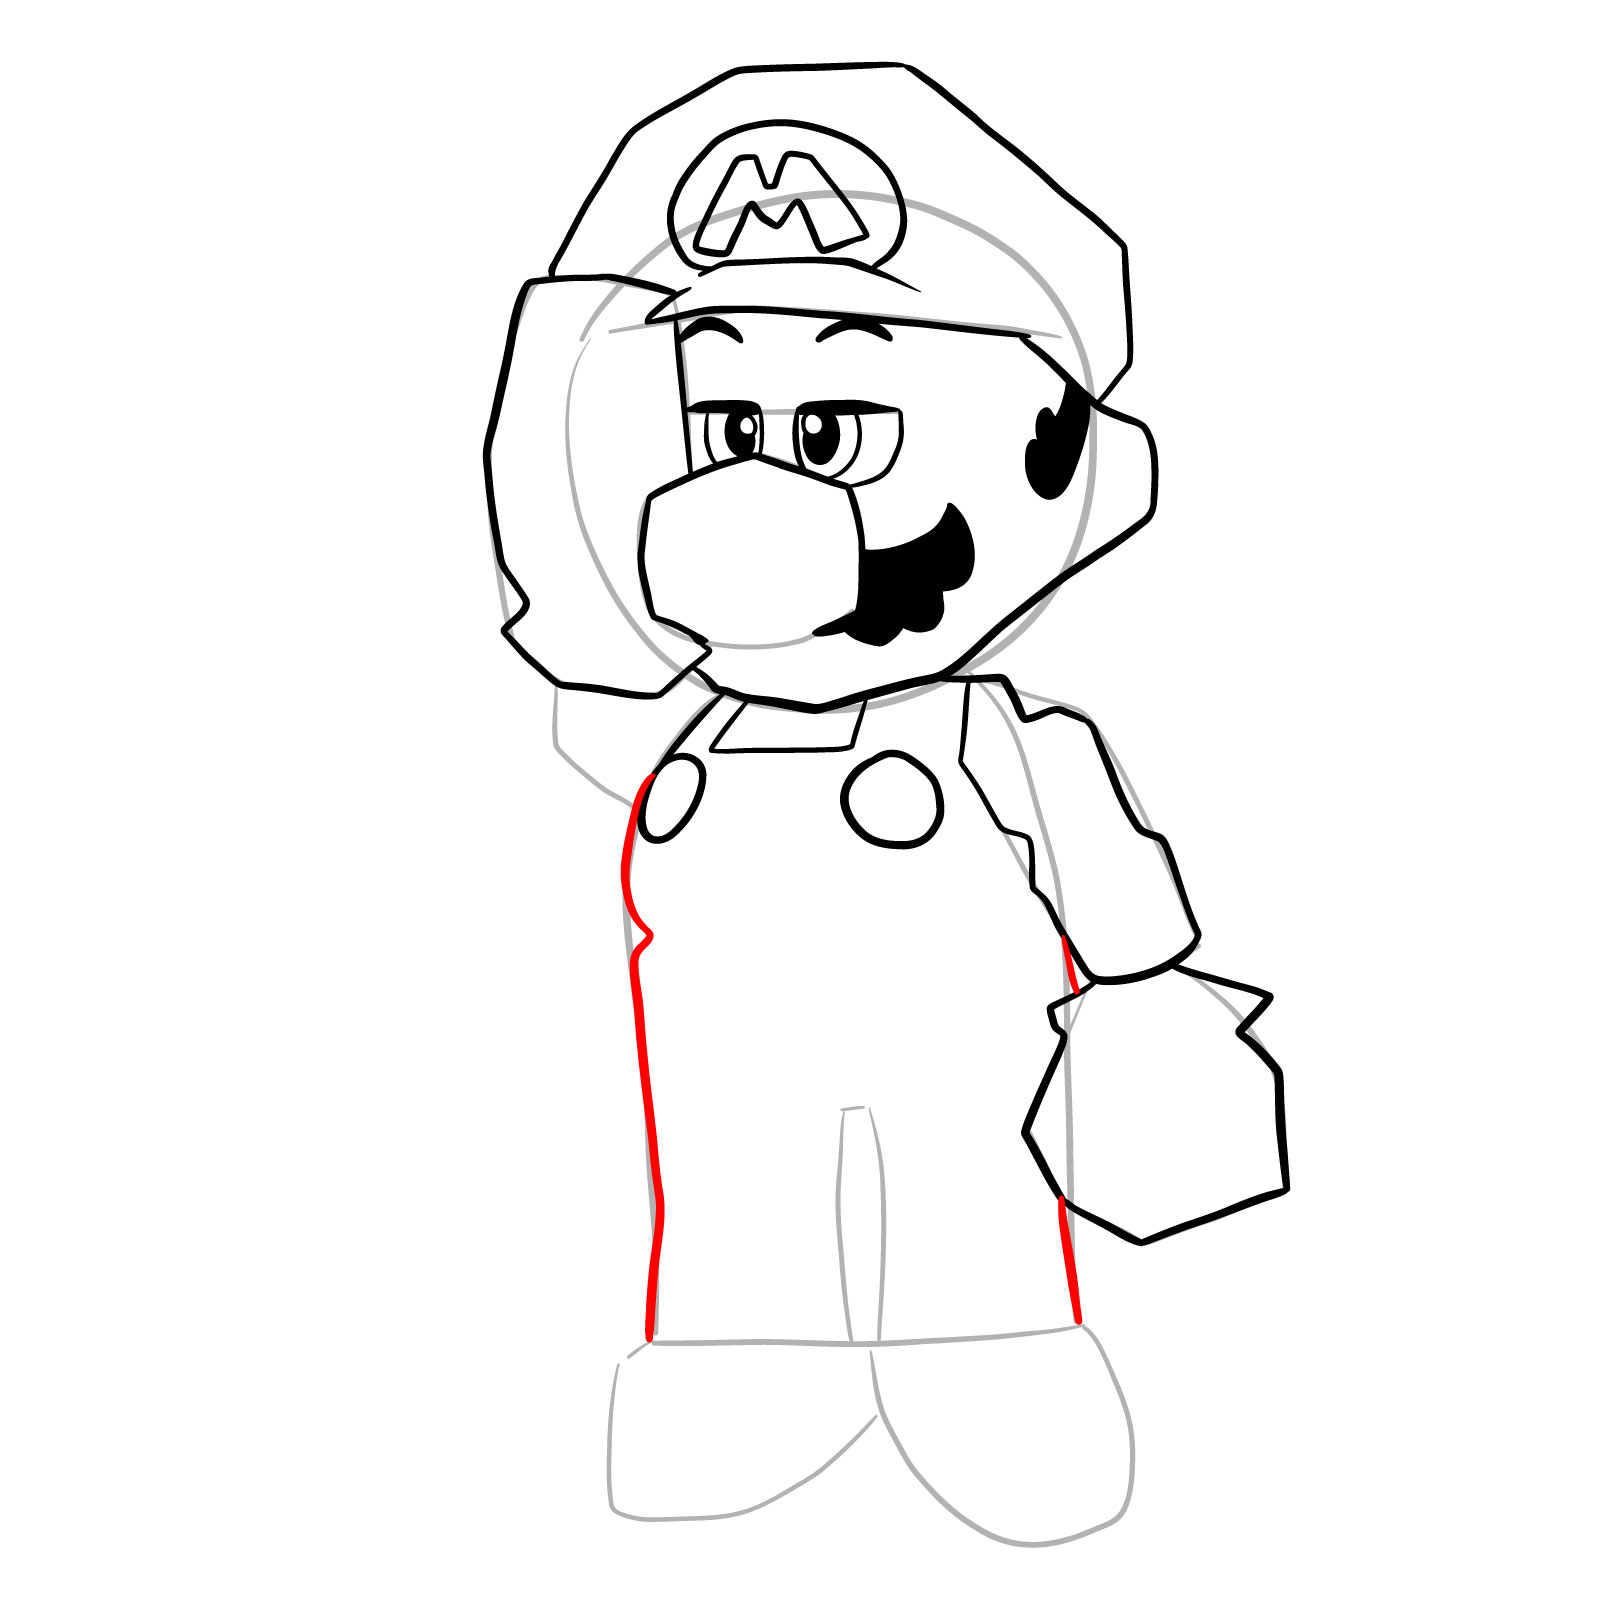 How to draw SuperMarioGlitchy4 (N64) - step 20